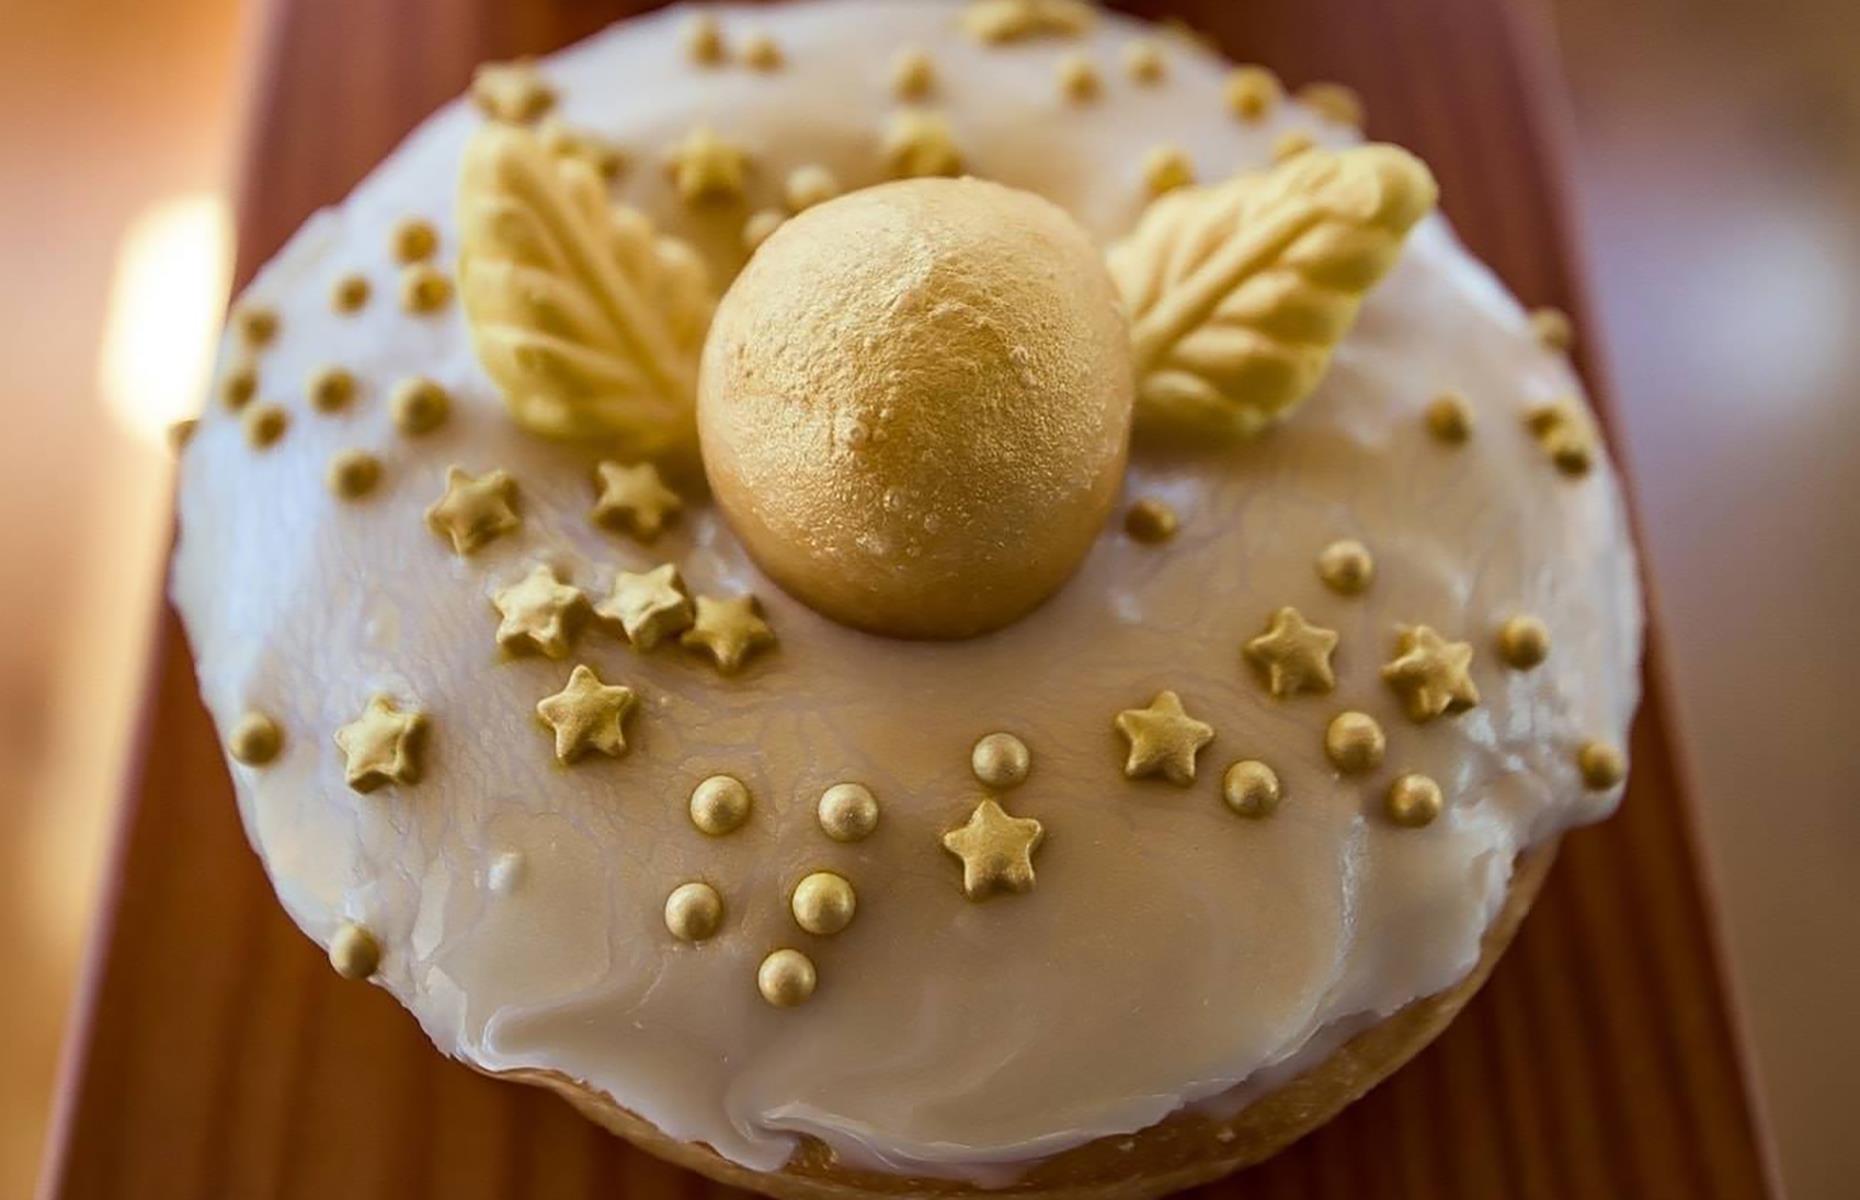 <p><a href="https://www.sugarshackdonuts.com/">Sugar Shack Donuts</a>, which has two Virginia locations, first released the Golden Snitch to celebrate Harry Potter's birthday on 31 July 2018. The gilded creation has returned – due to popular demand – several times since so there's a chance customers could catch one in the future. The beautiful donut has a Butterbeer glaze and is decorated with gold stars and the shape of a 'snitch', a tricky-to-catch ball that features in the novels' fictional game of Quidditch.</p>